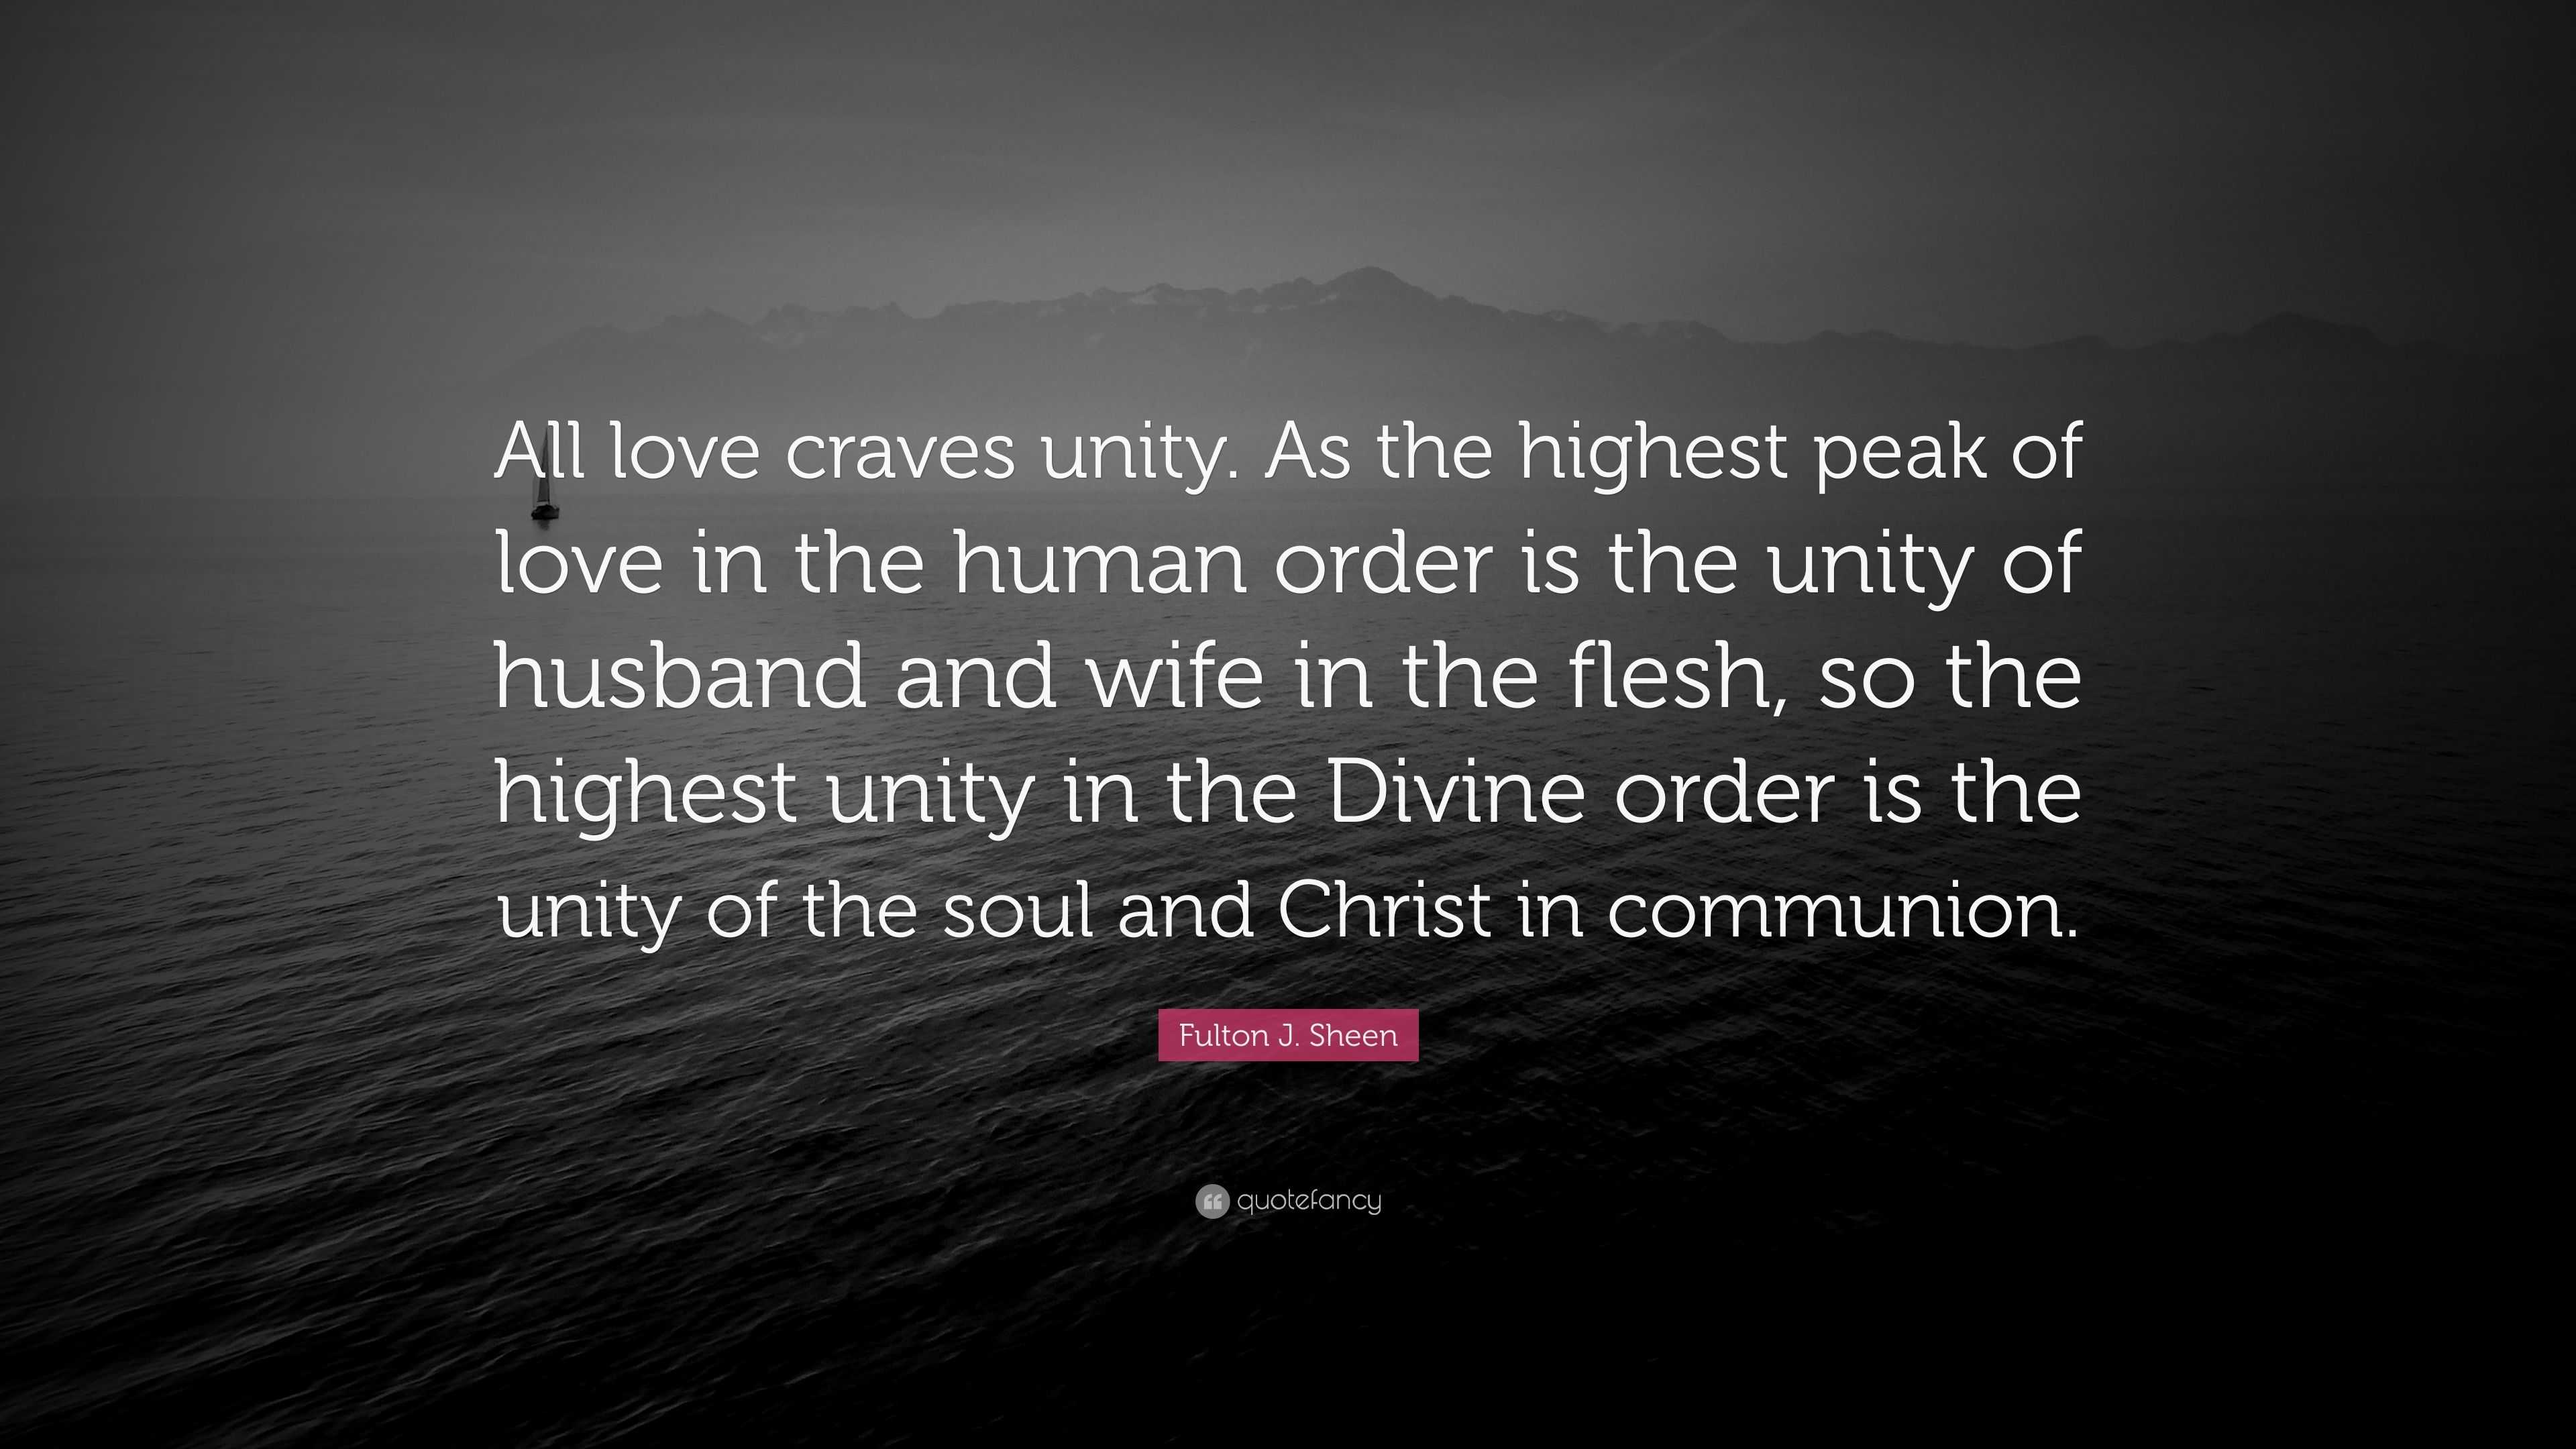 Fulton J. Sheen Quote “All love craves unity. As the